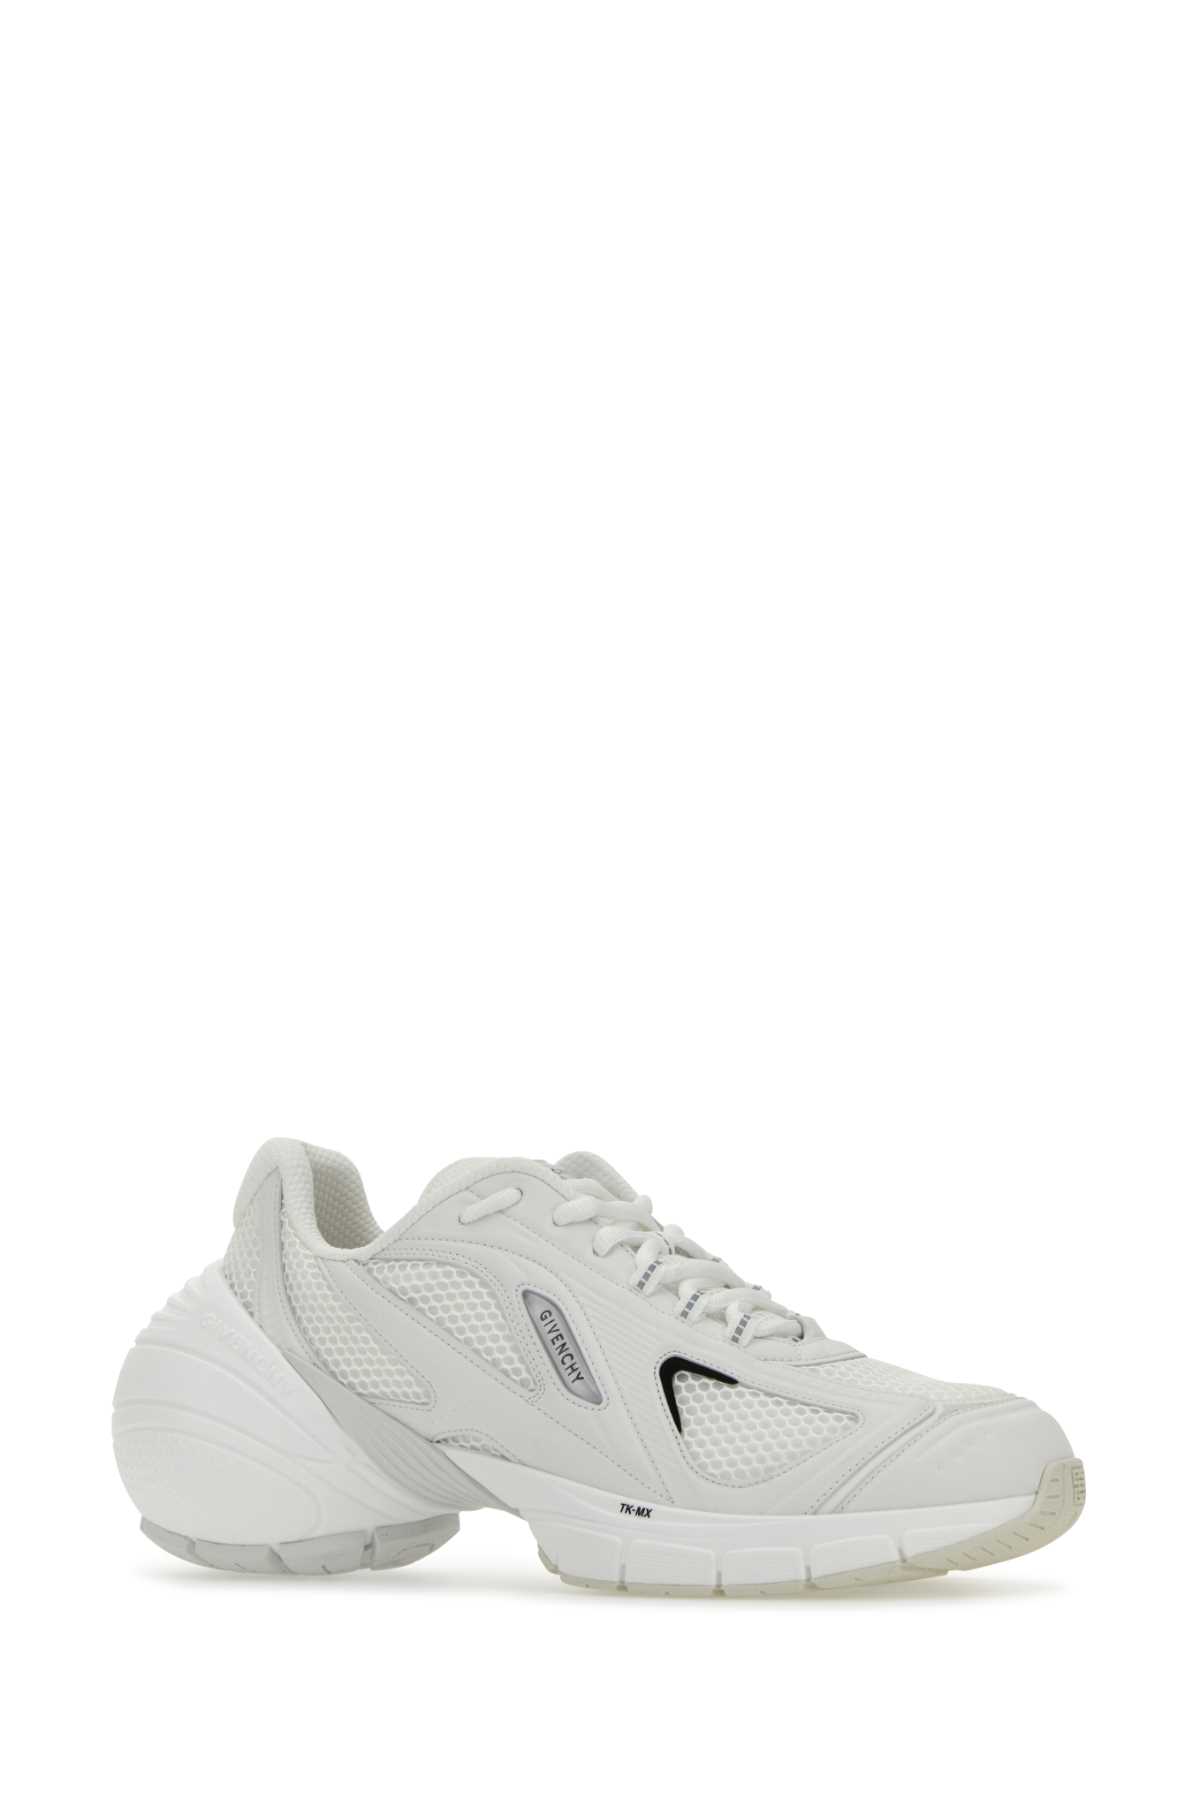 Givenchy White Mesh And Synthetic Leather Tk-mx Sneakers